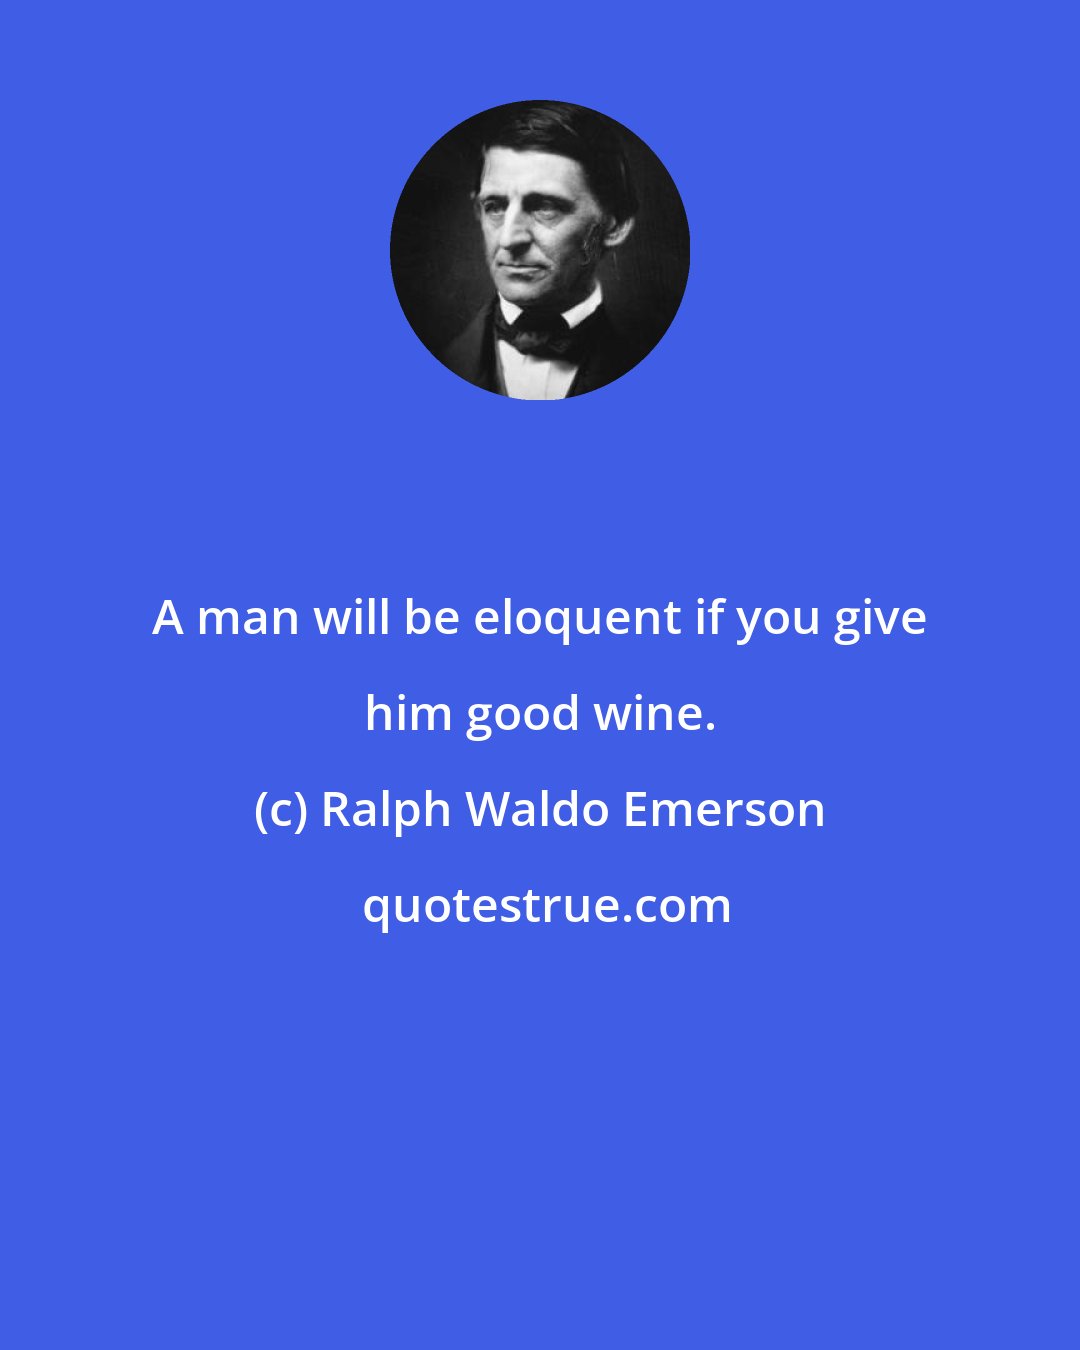 Ralph Waldo Emerson: A man will be eloquent if you give him good wine.